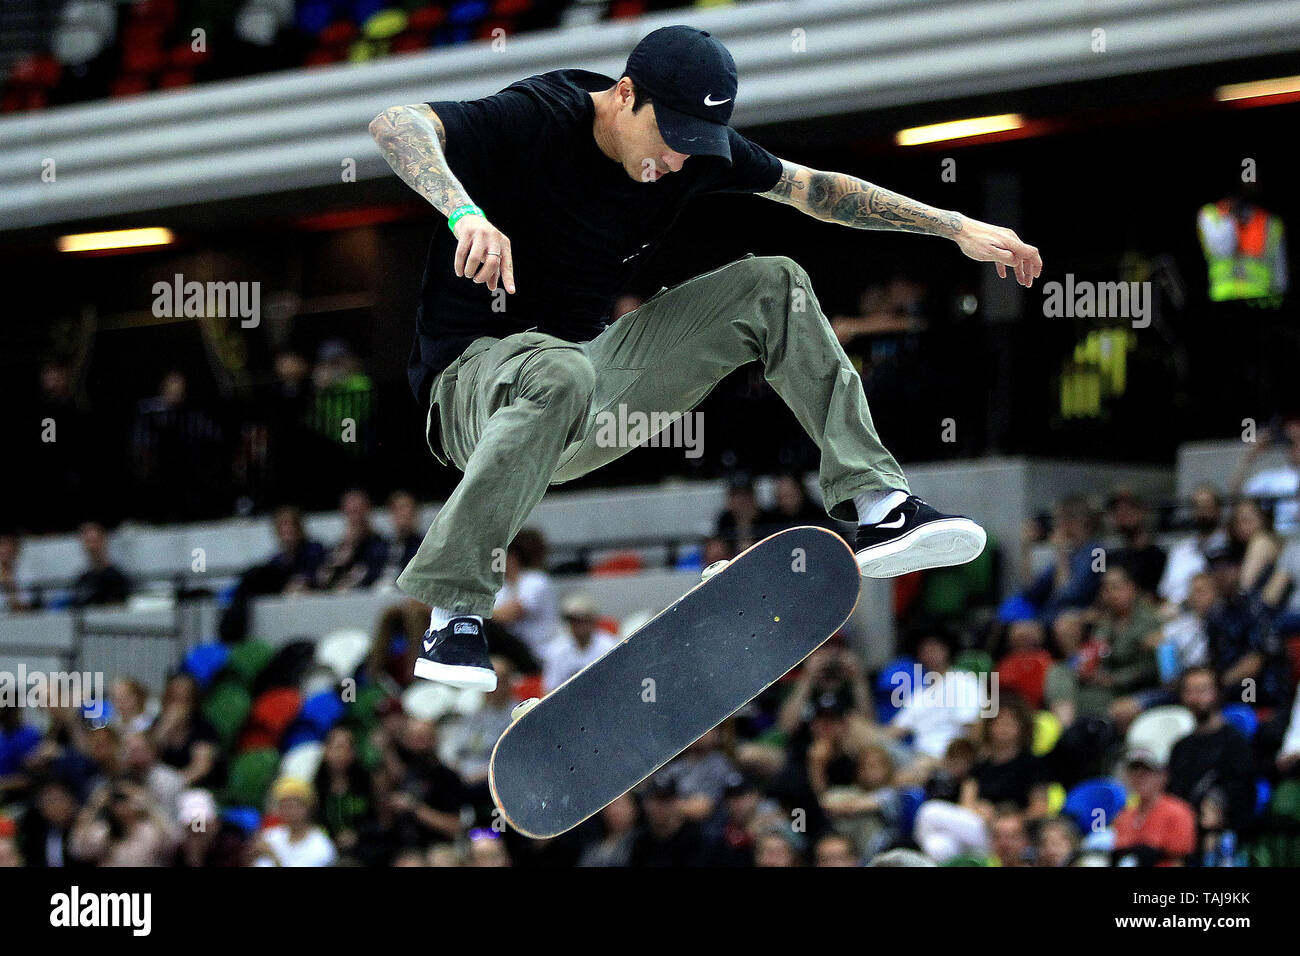 A male skater pulls a kick flip trick during the men's quarter finals. 2019  SLS World Tour, Street League Skateboarding event at the Copper Box arena,  Queen Elizabeth Olympic Park in London